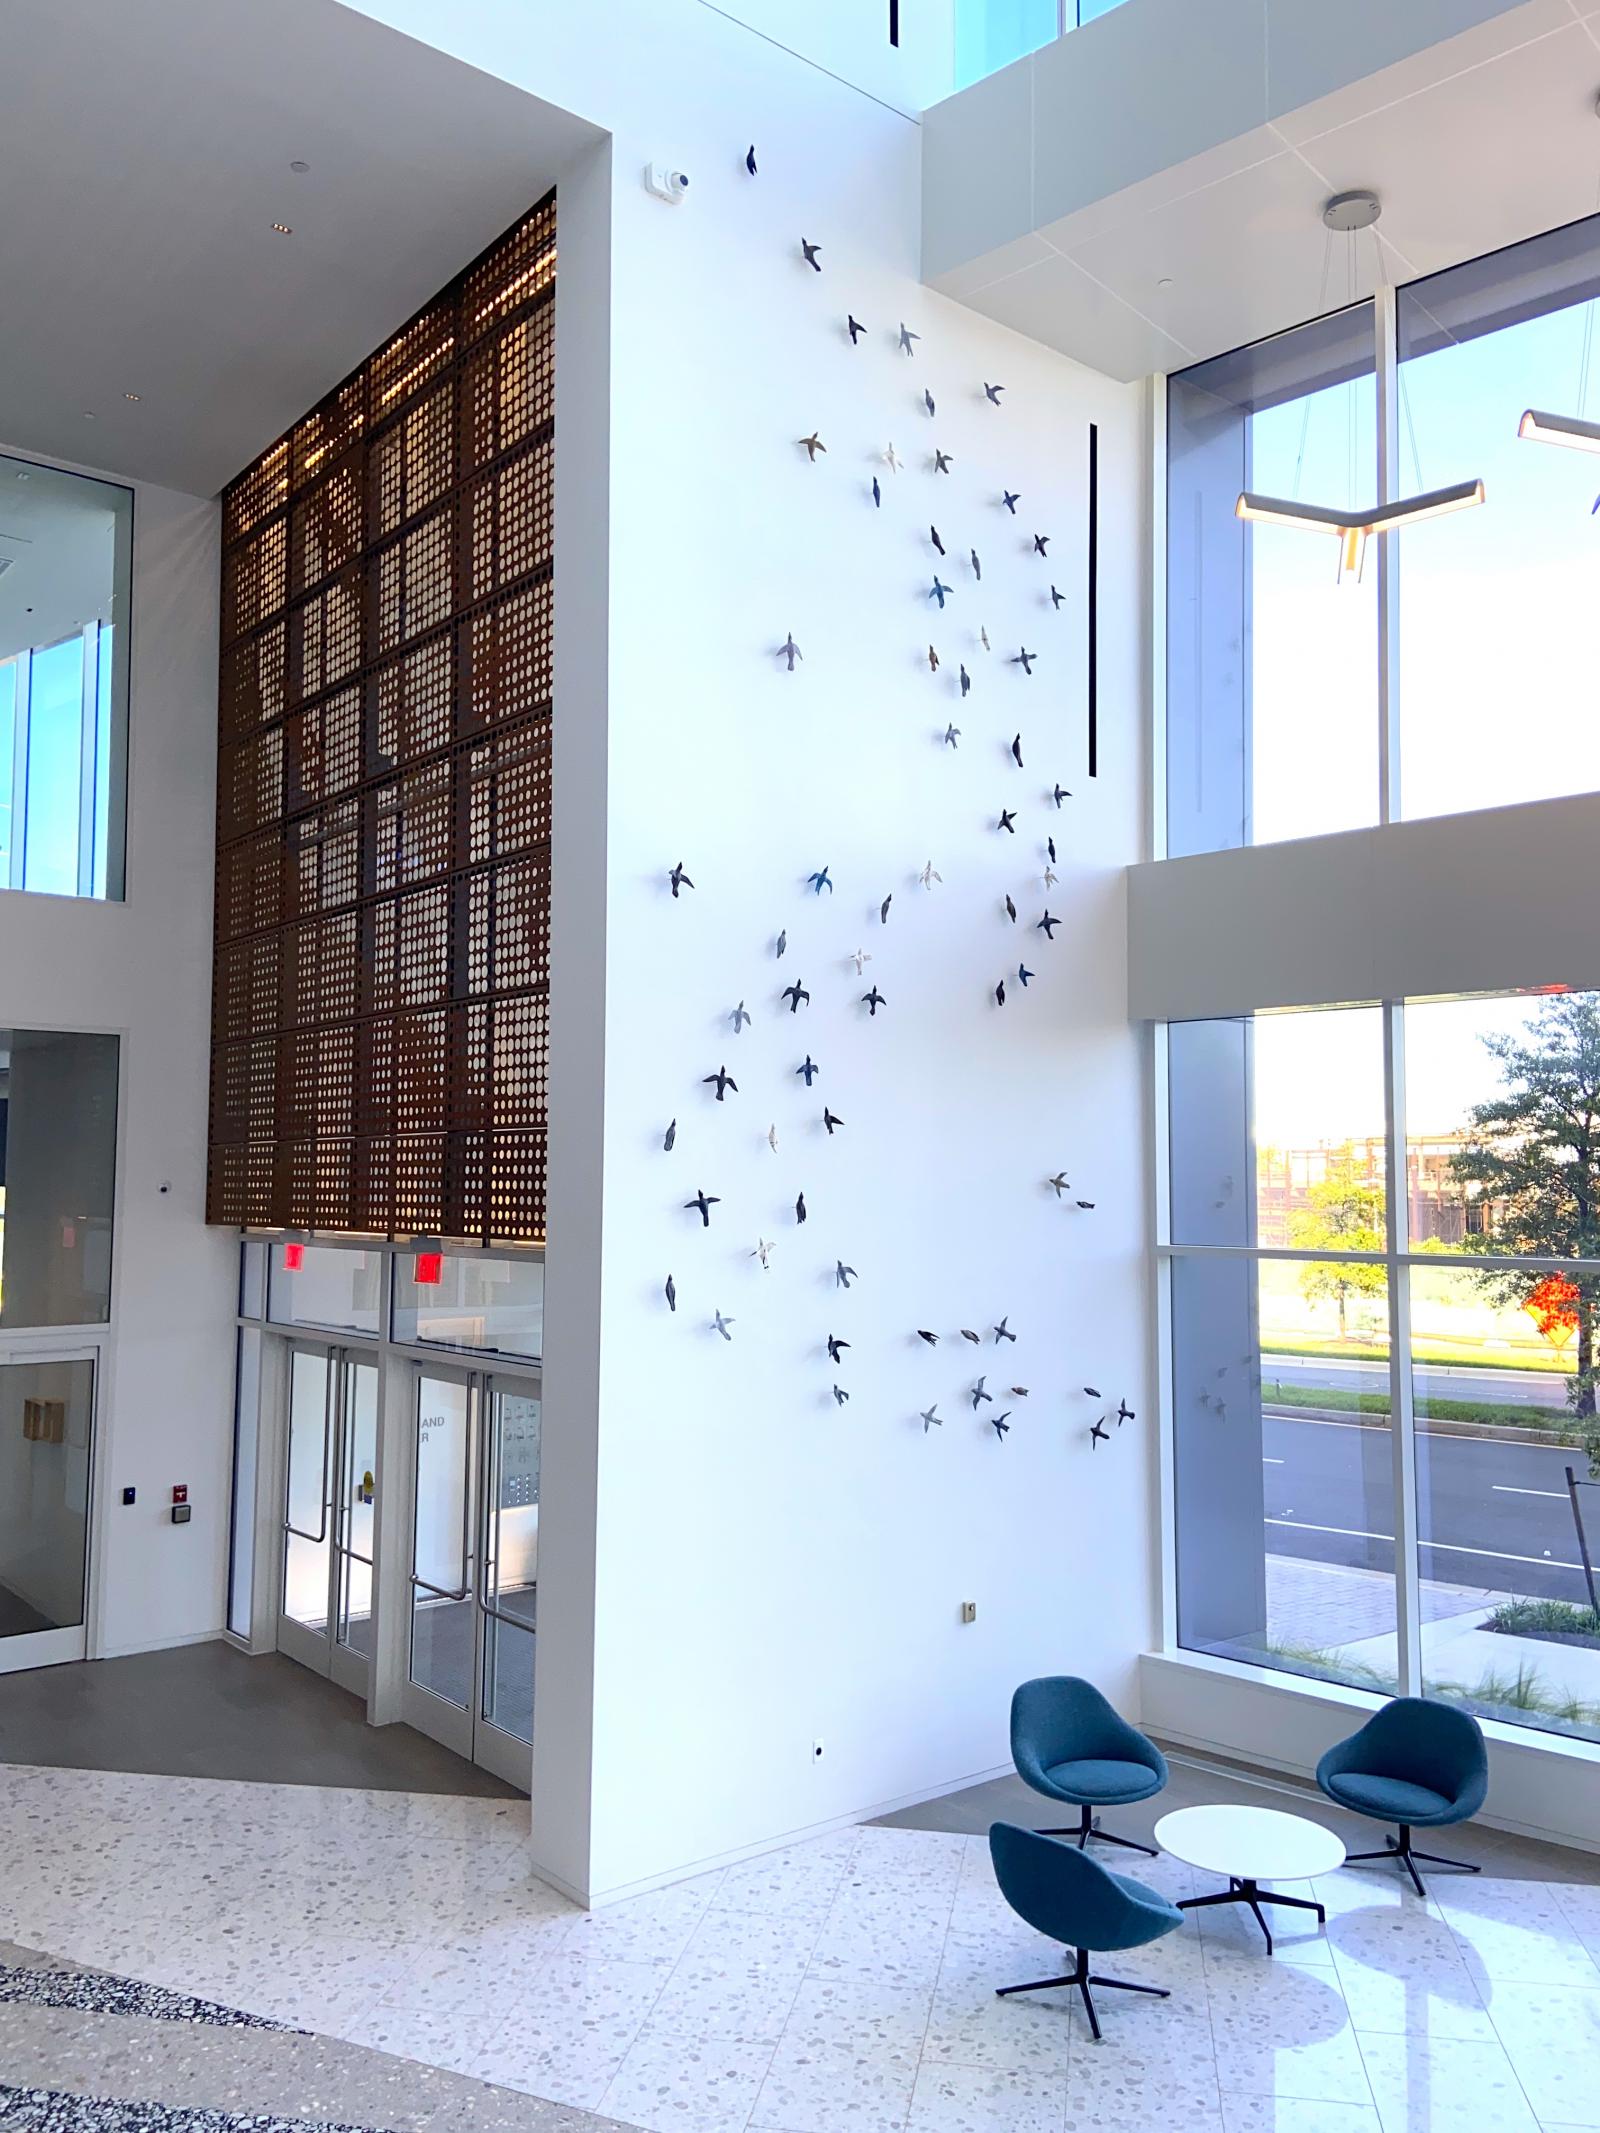 commissioned by the American Physical Therapy Association, I was asked to respond visually in a specified space to their motto: Move to Soar.  The building is their new headquarters in Alexandria, VA.  I used 65 clay birds, in a variety of colored pigments,  in an ascending flight formation spanning a 26'x12' wall space.